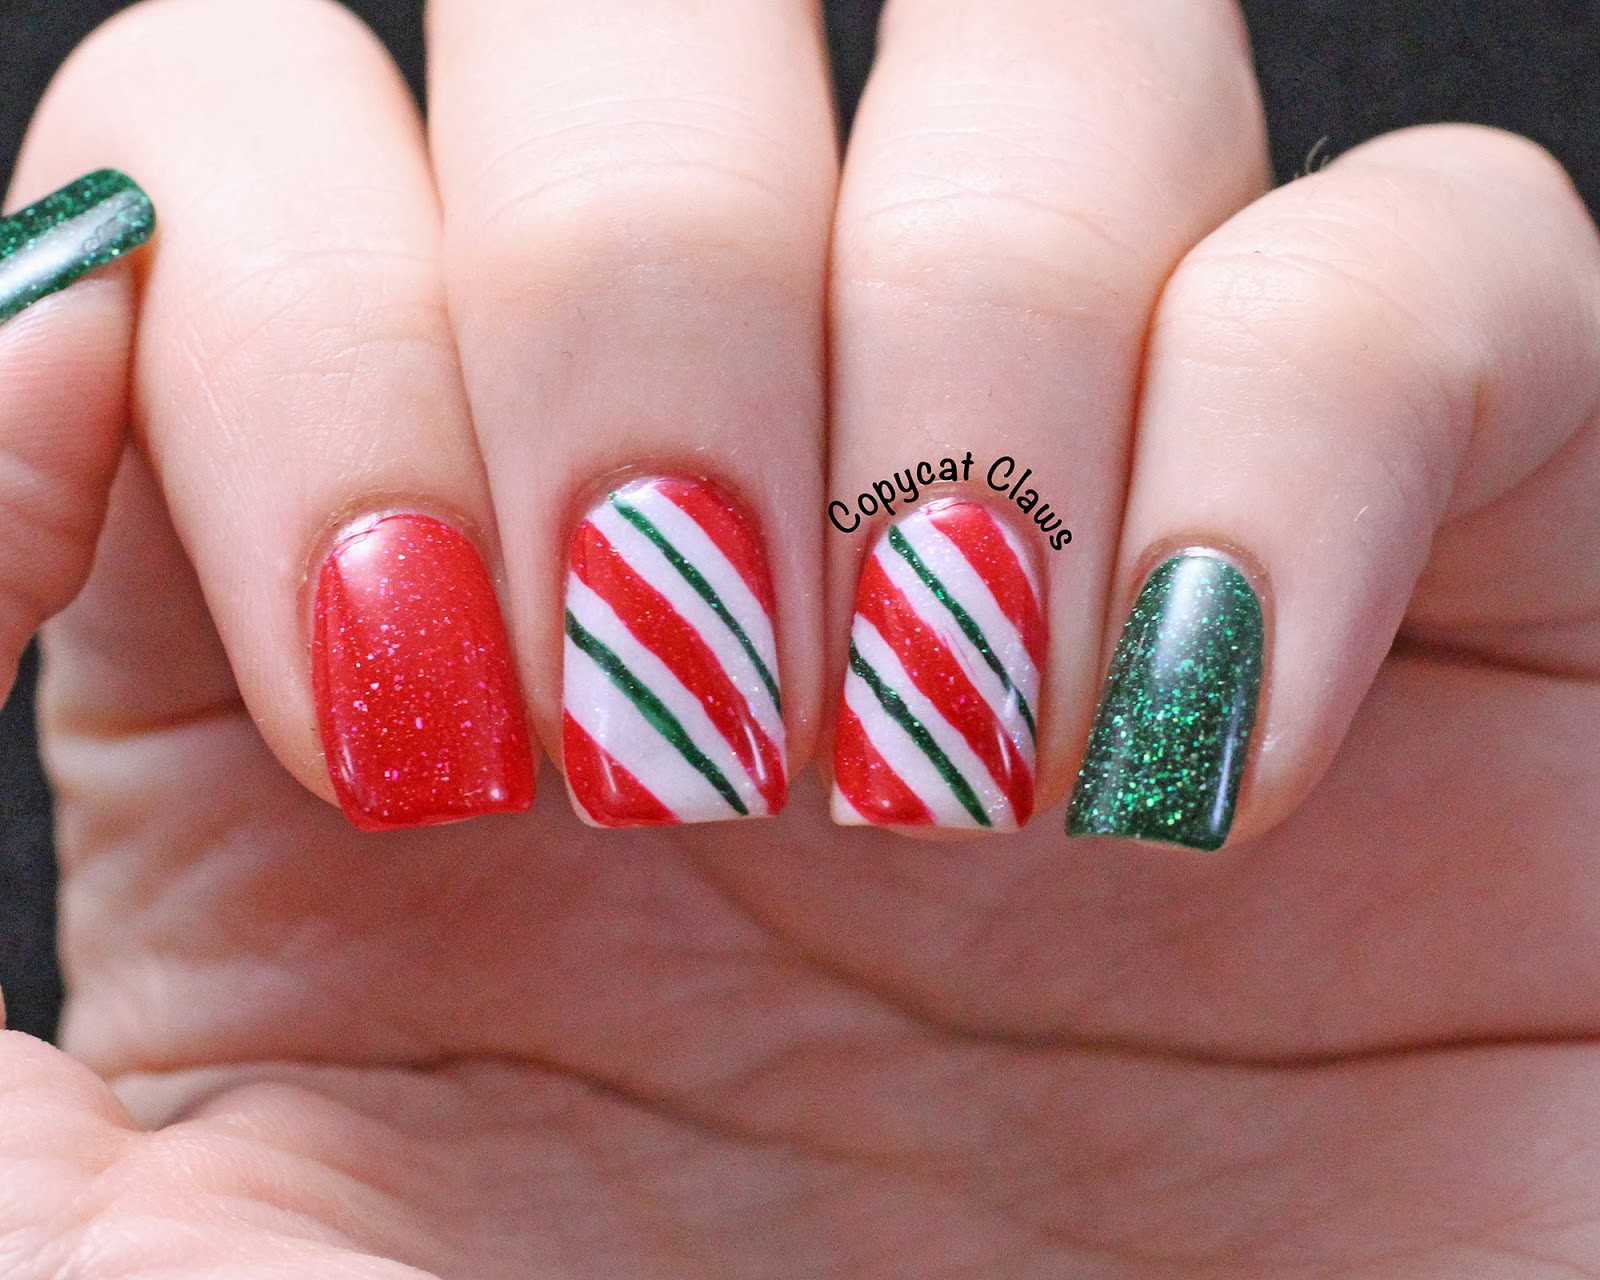 Candy Cane Nail Art
 Copycat Claws Picture Polish Candy Cane Nail Art